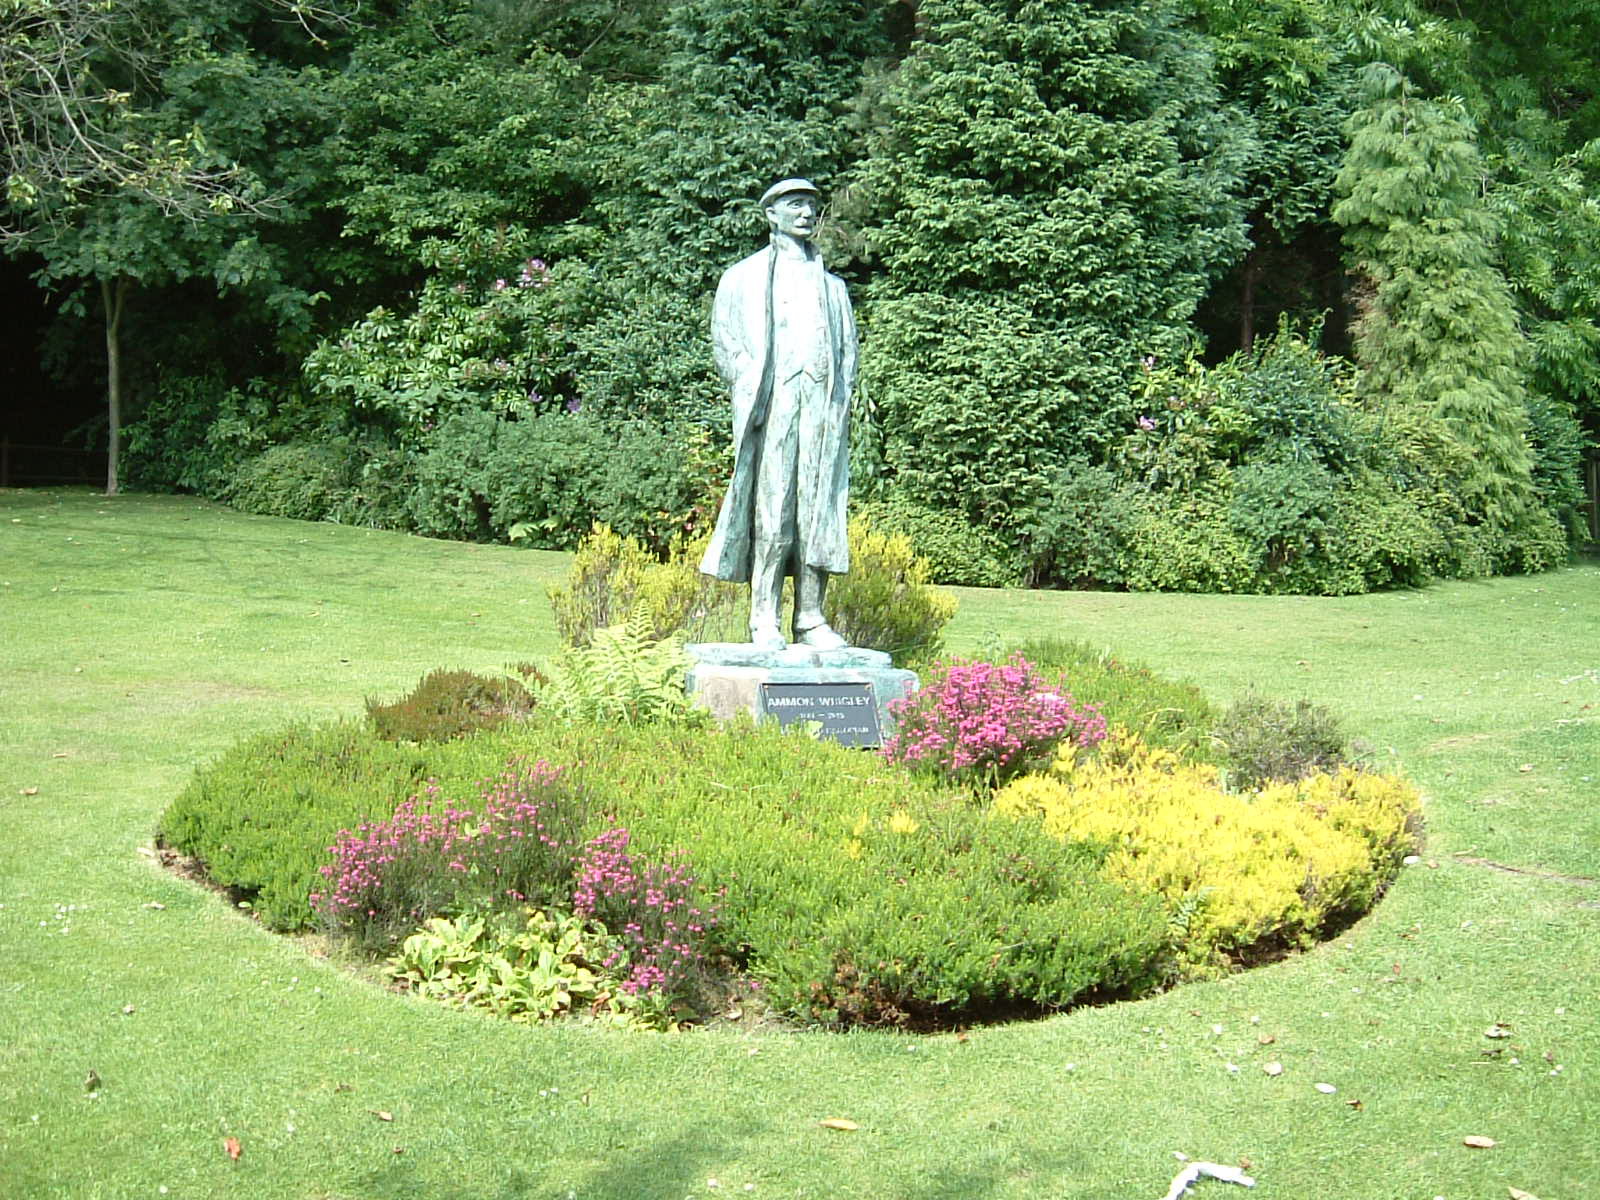 A statue of Ammon Wrigley